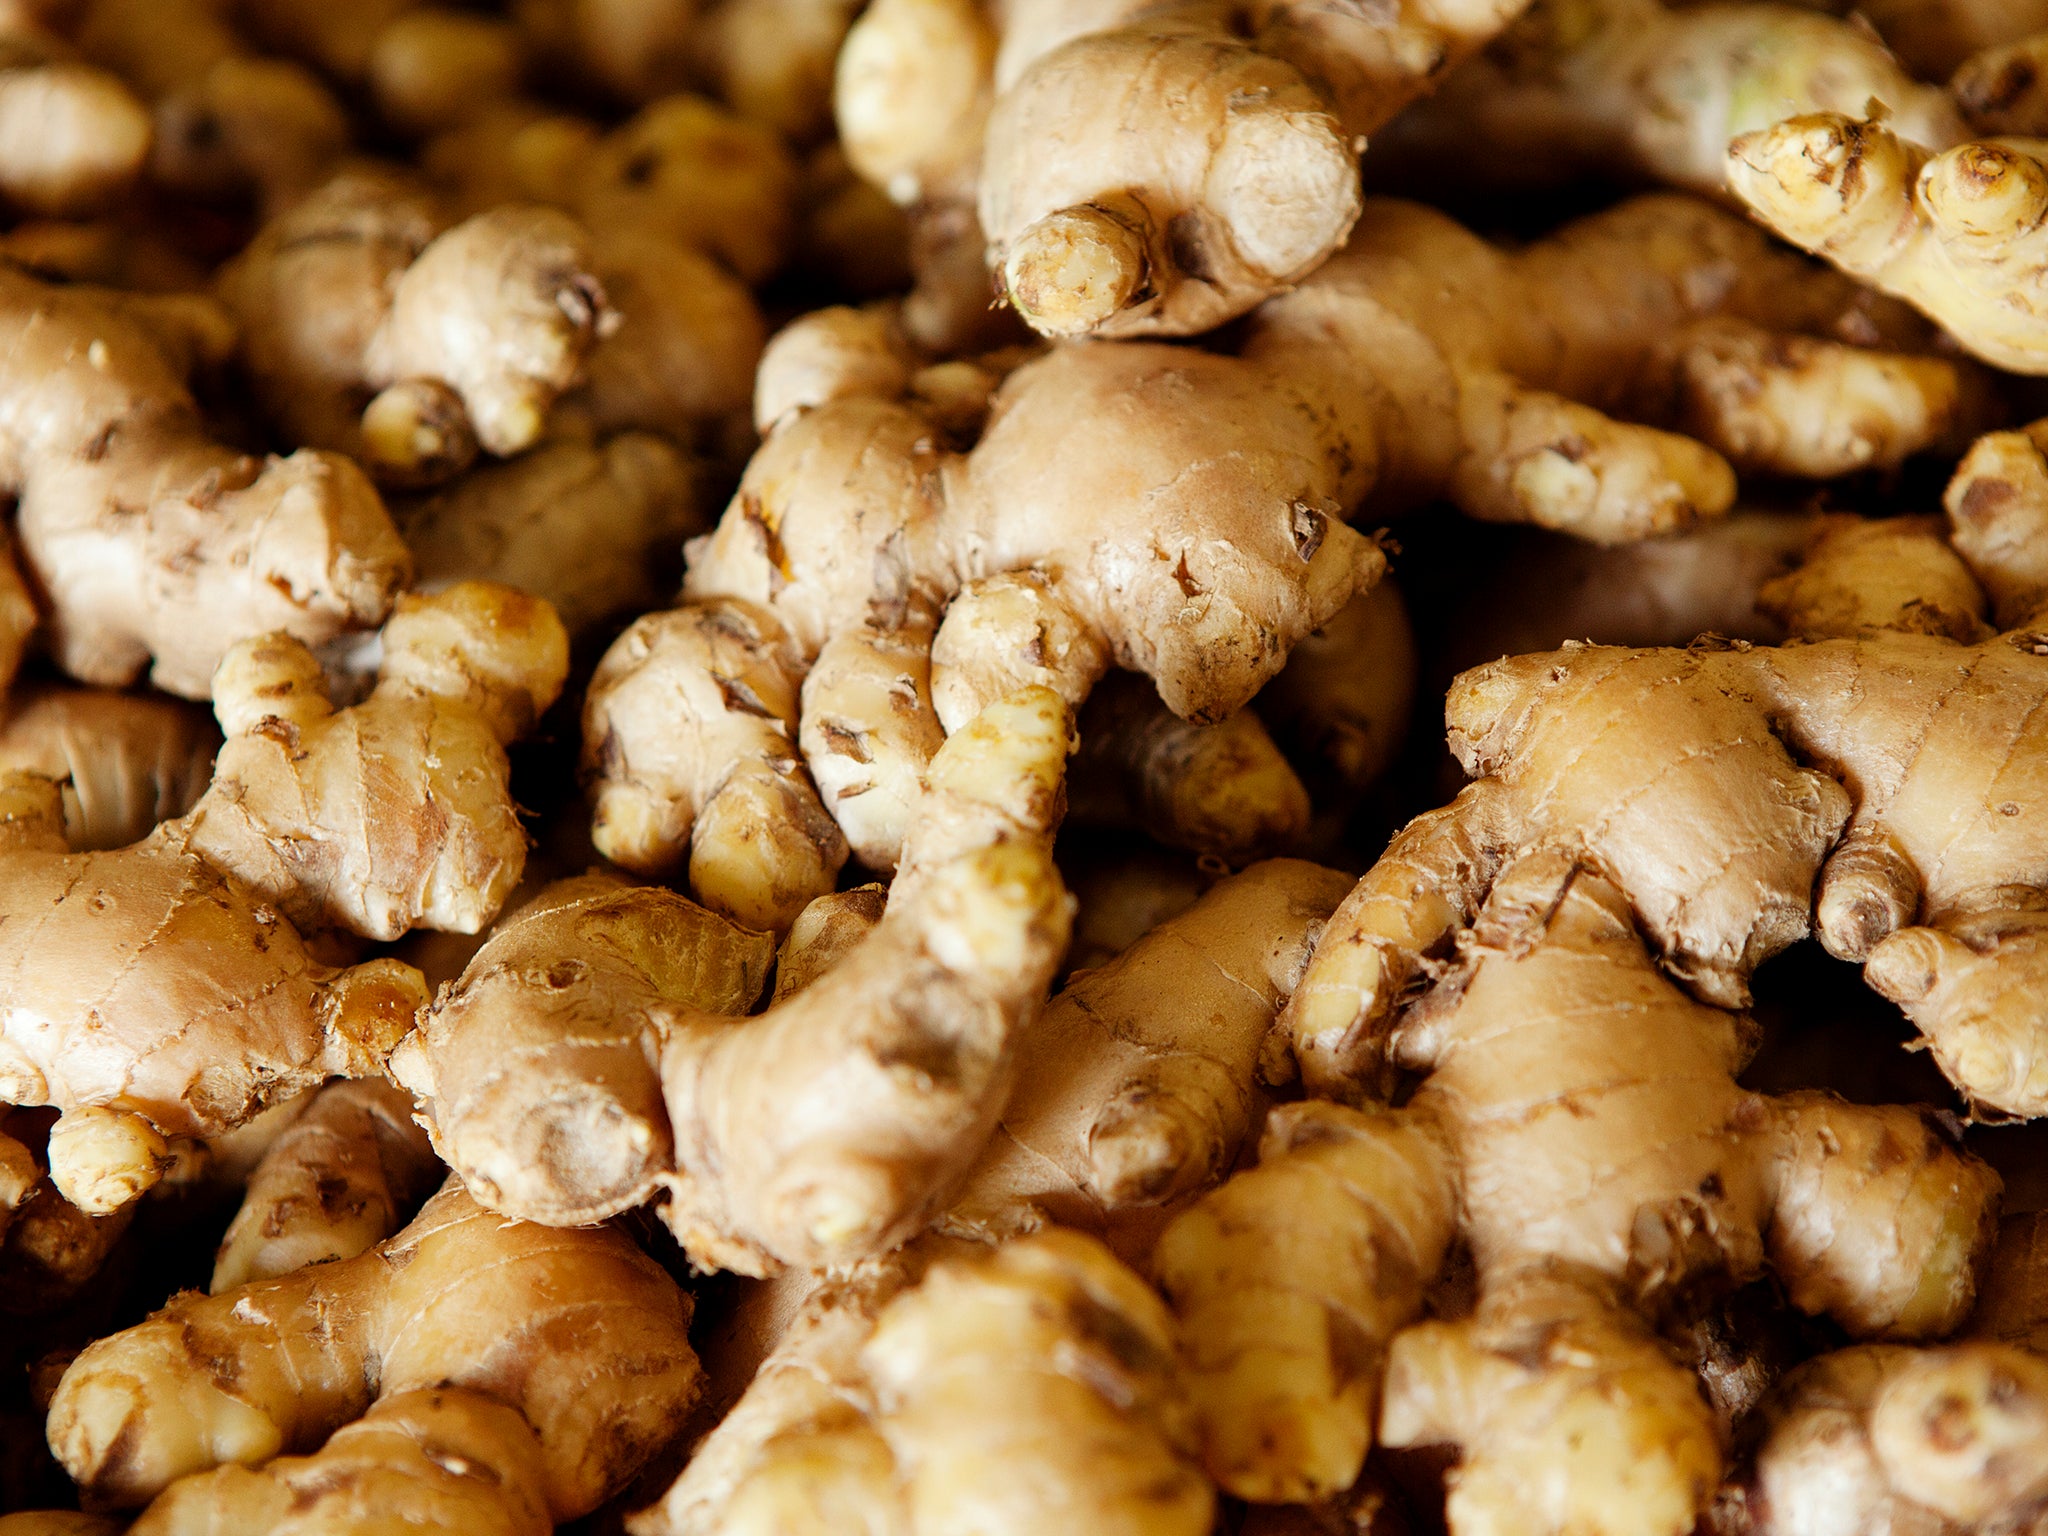 Ginger is also believed to help chronic indigestion and muscle pain